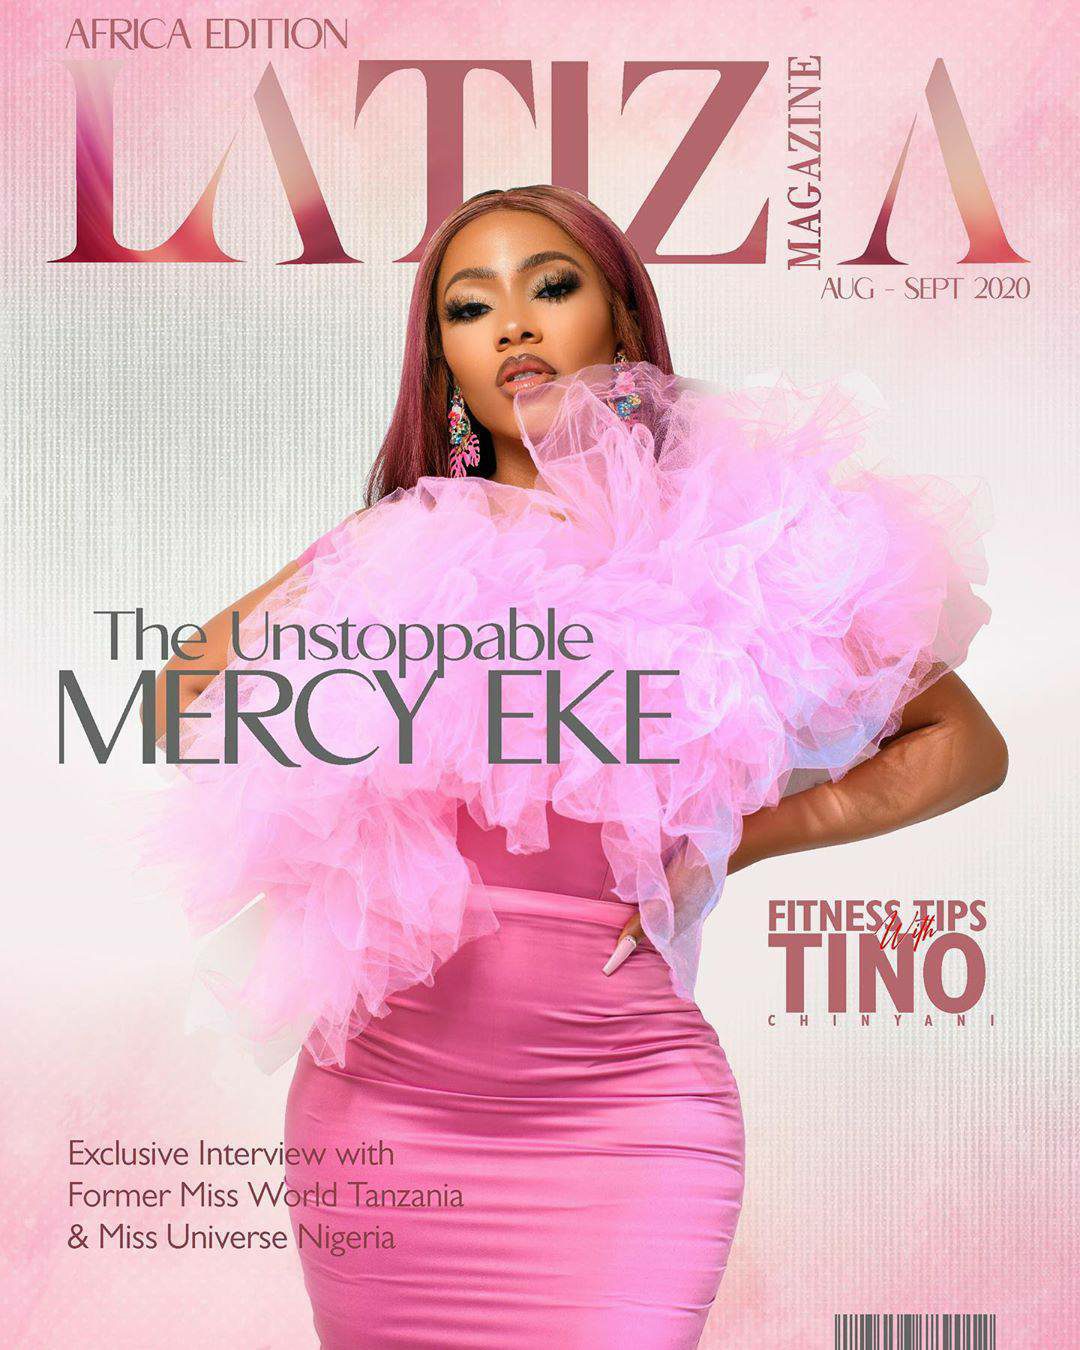 3mercy eke wears the frothy pink dress of our dreams on latiza magazines new cover compress301185060298316496554